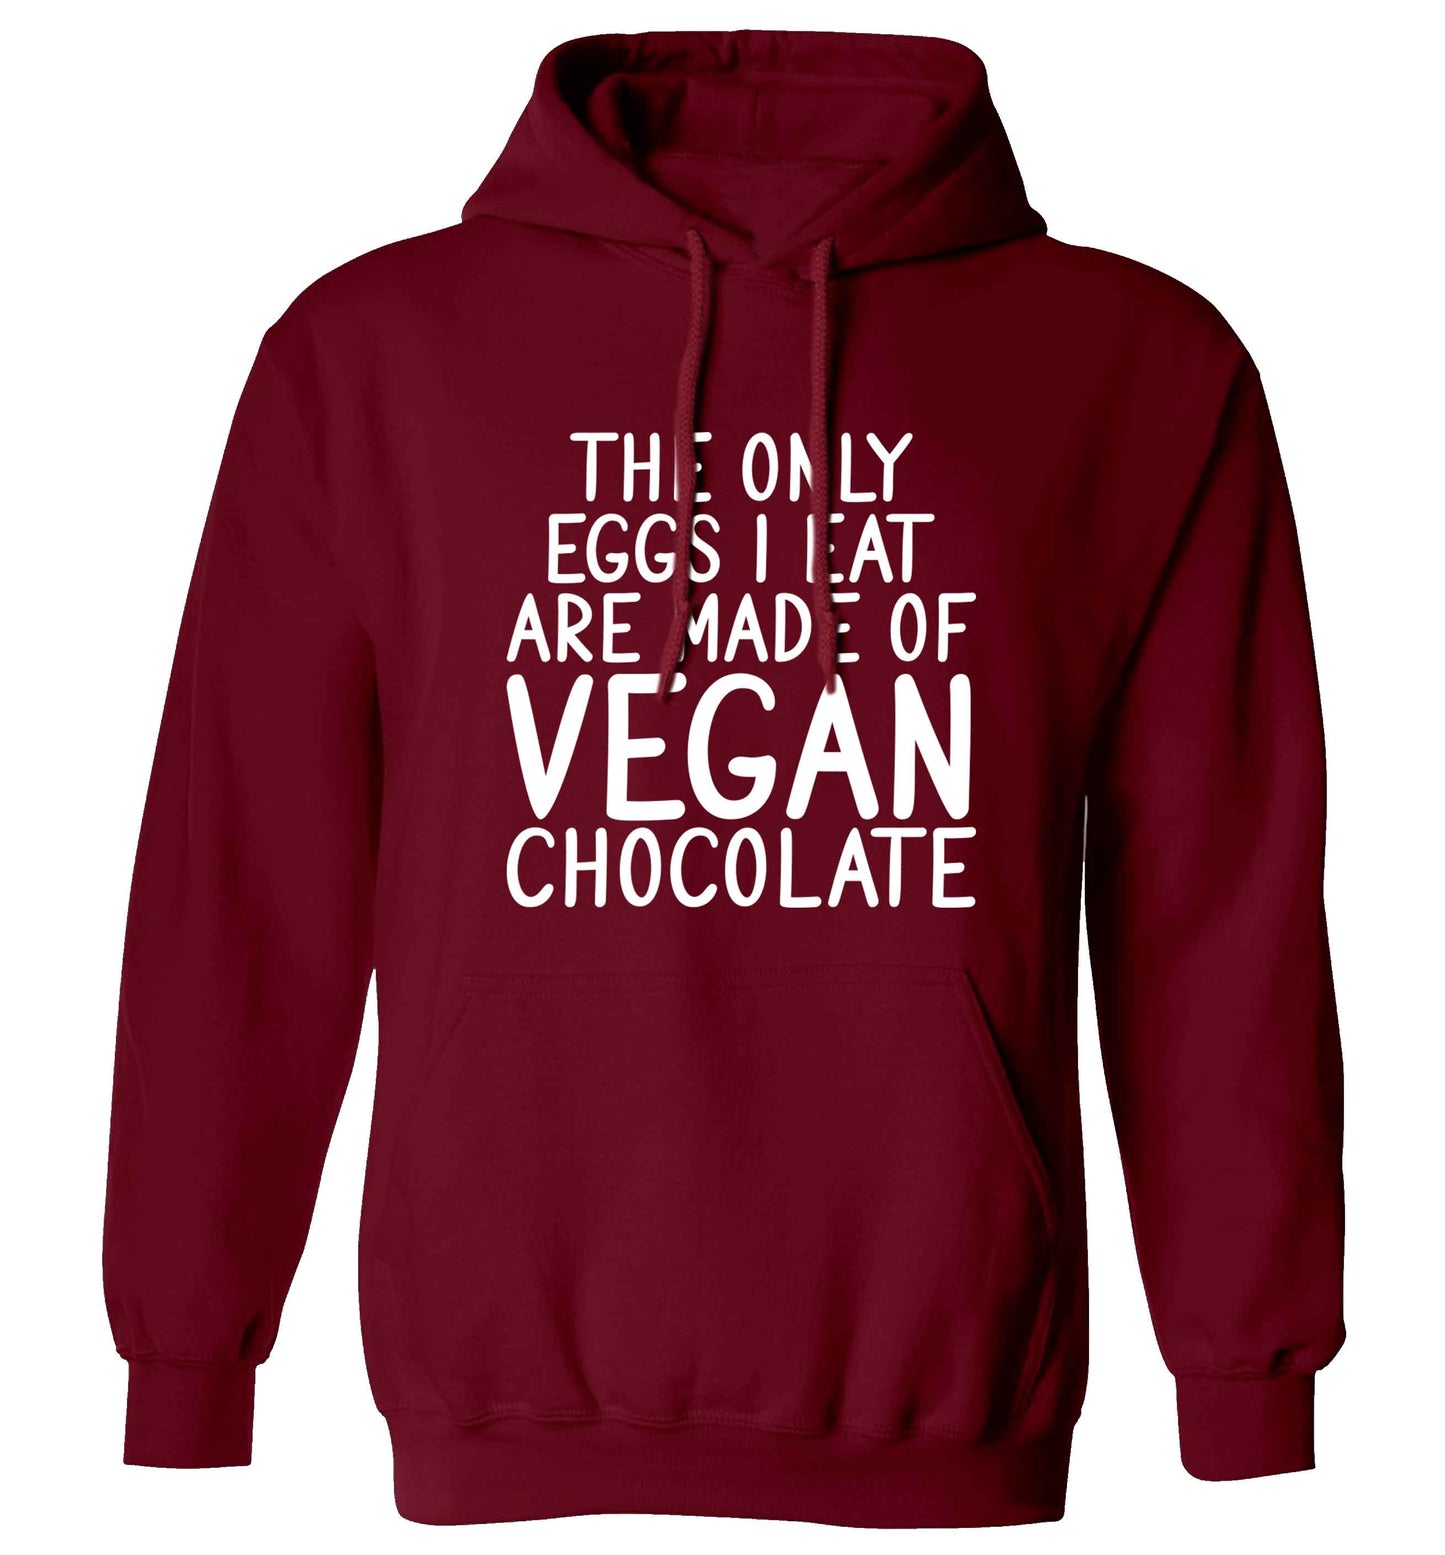 The only eggs I eat are made of vegan chocolate adults unisex maroon hoodie 2XL